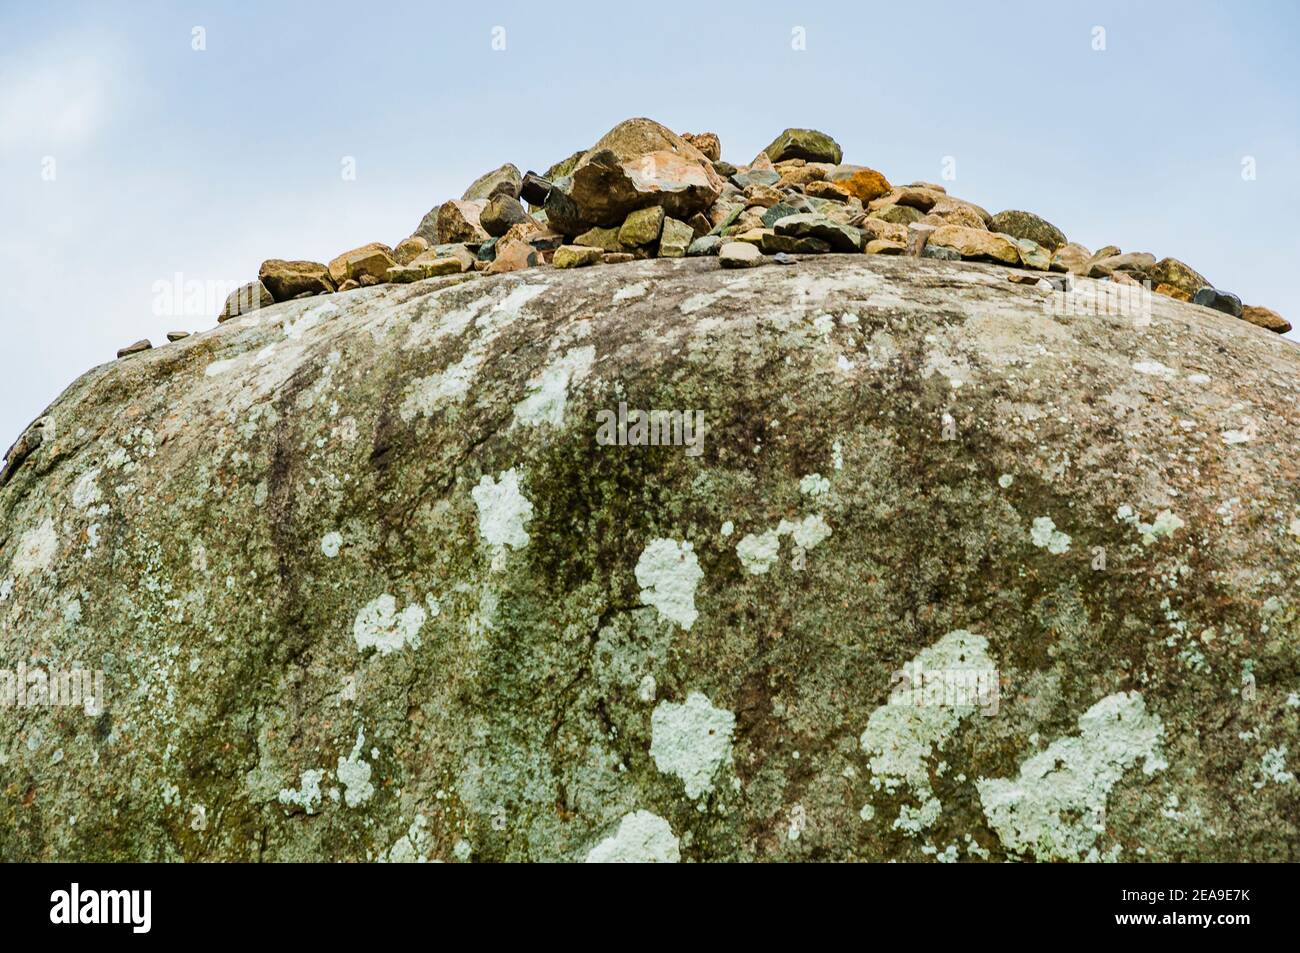 Local tradition claims that if a visitor lands three stones atop the dolmen, they will be granted a wish, or will be married within the year. Proleek Stock Photo